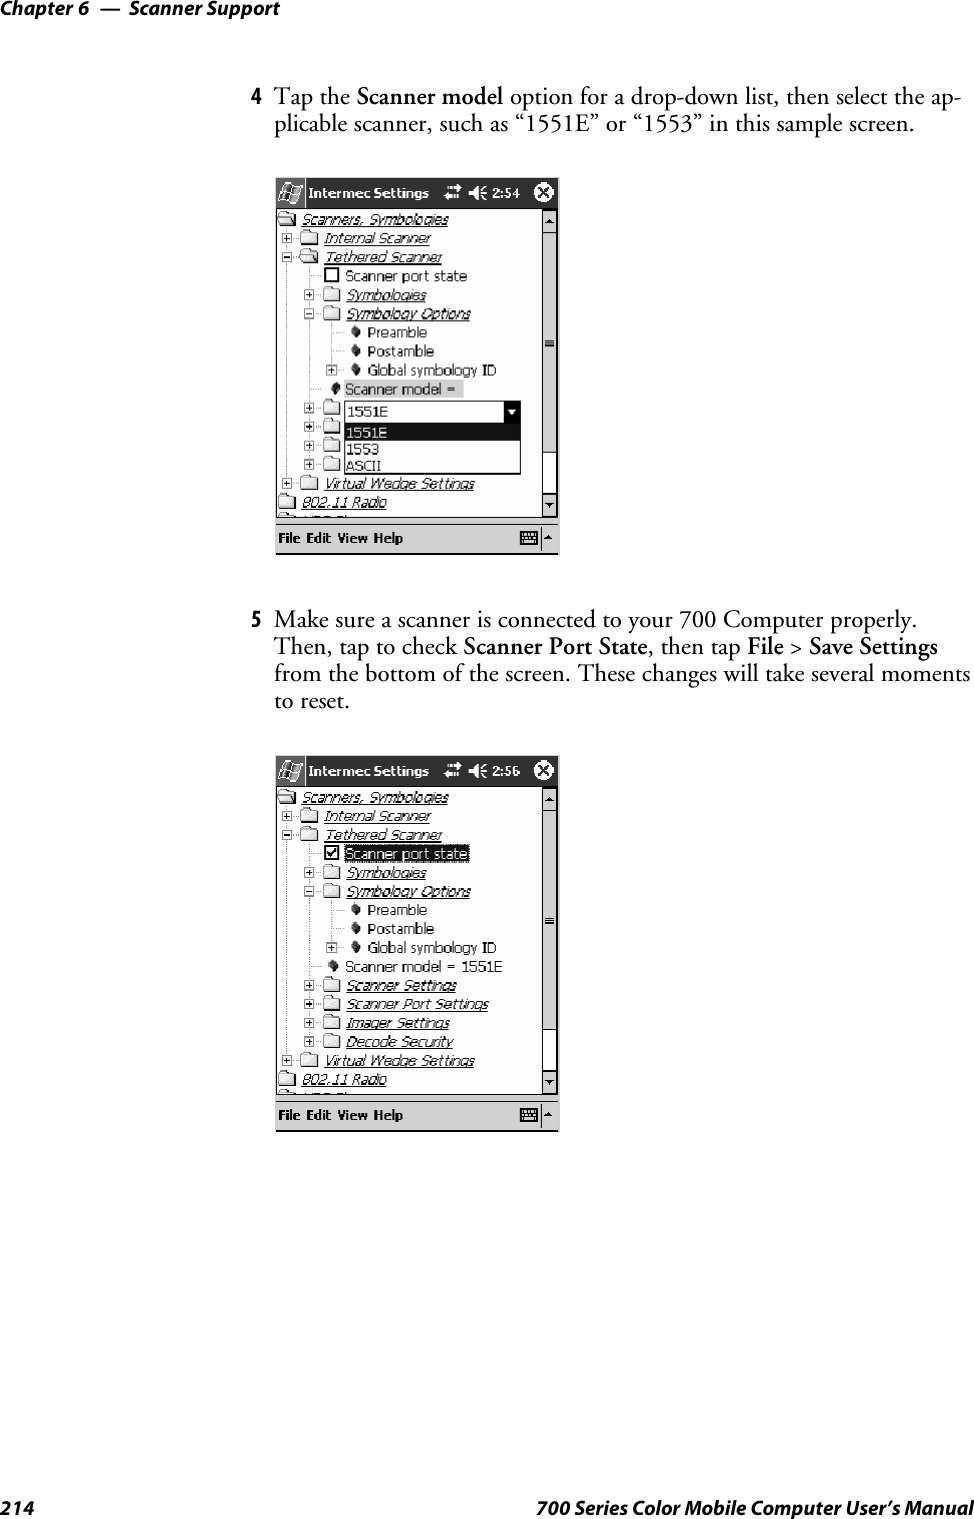 Scanner SupportChapter —6214 700 Series Color Mobile Computer User’s Manual4Tap the Scanner model option for a drop-down list, then select the ap-plicable scanner, such as “1551E” or “1553” in this sample screen.5Make sure a scanner is connected to your 700 Computer properly.Then, tap to check Scanner Port State,thentapFile &gt;Save Settingsfrom the bottom of the screen. These changes will take several momentsto reset.